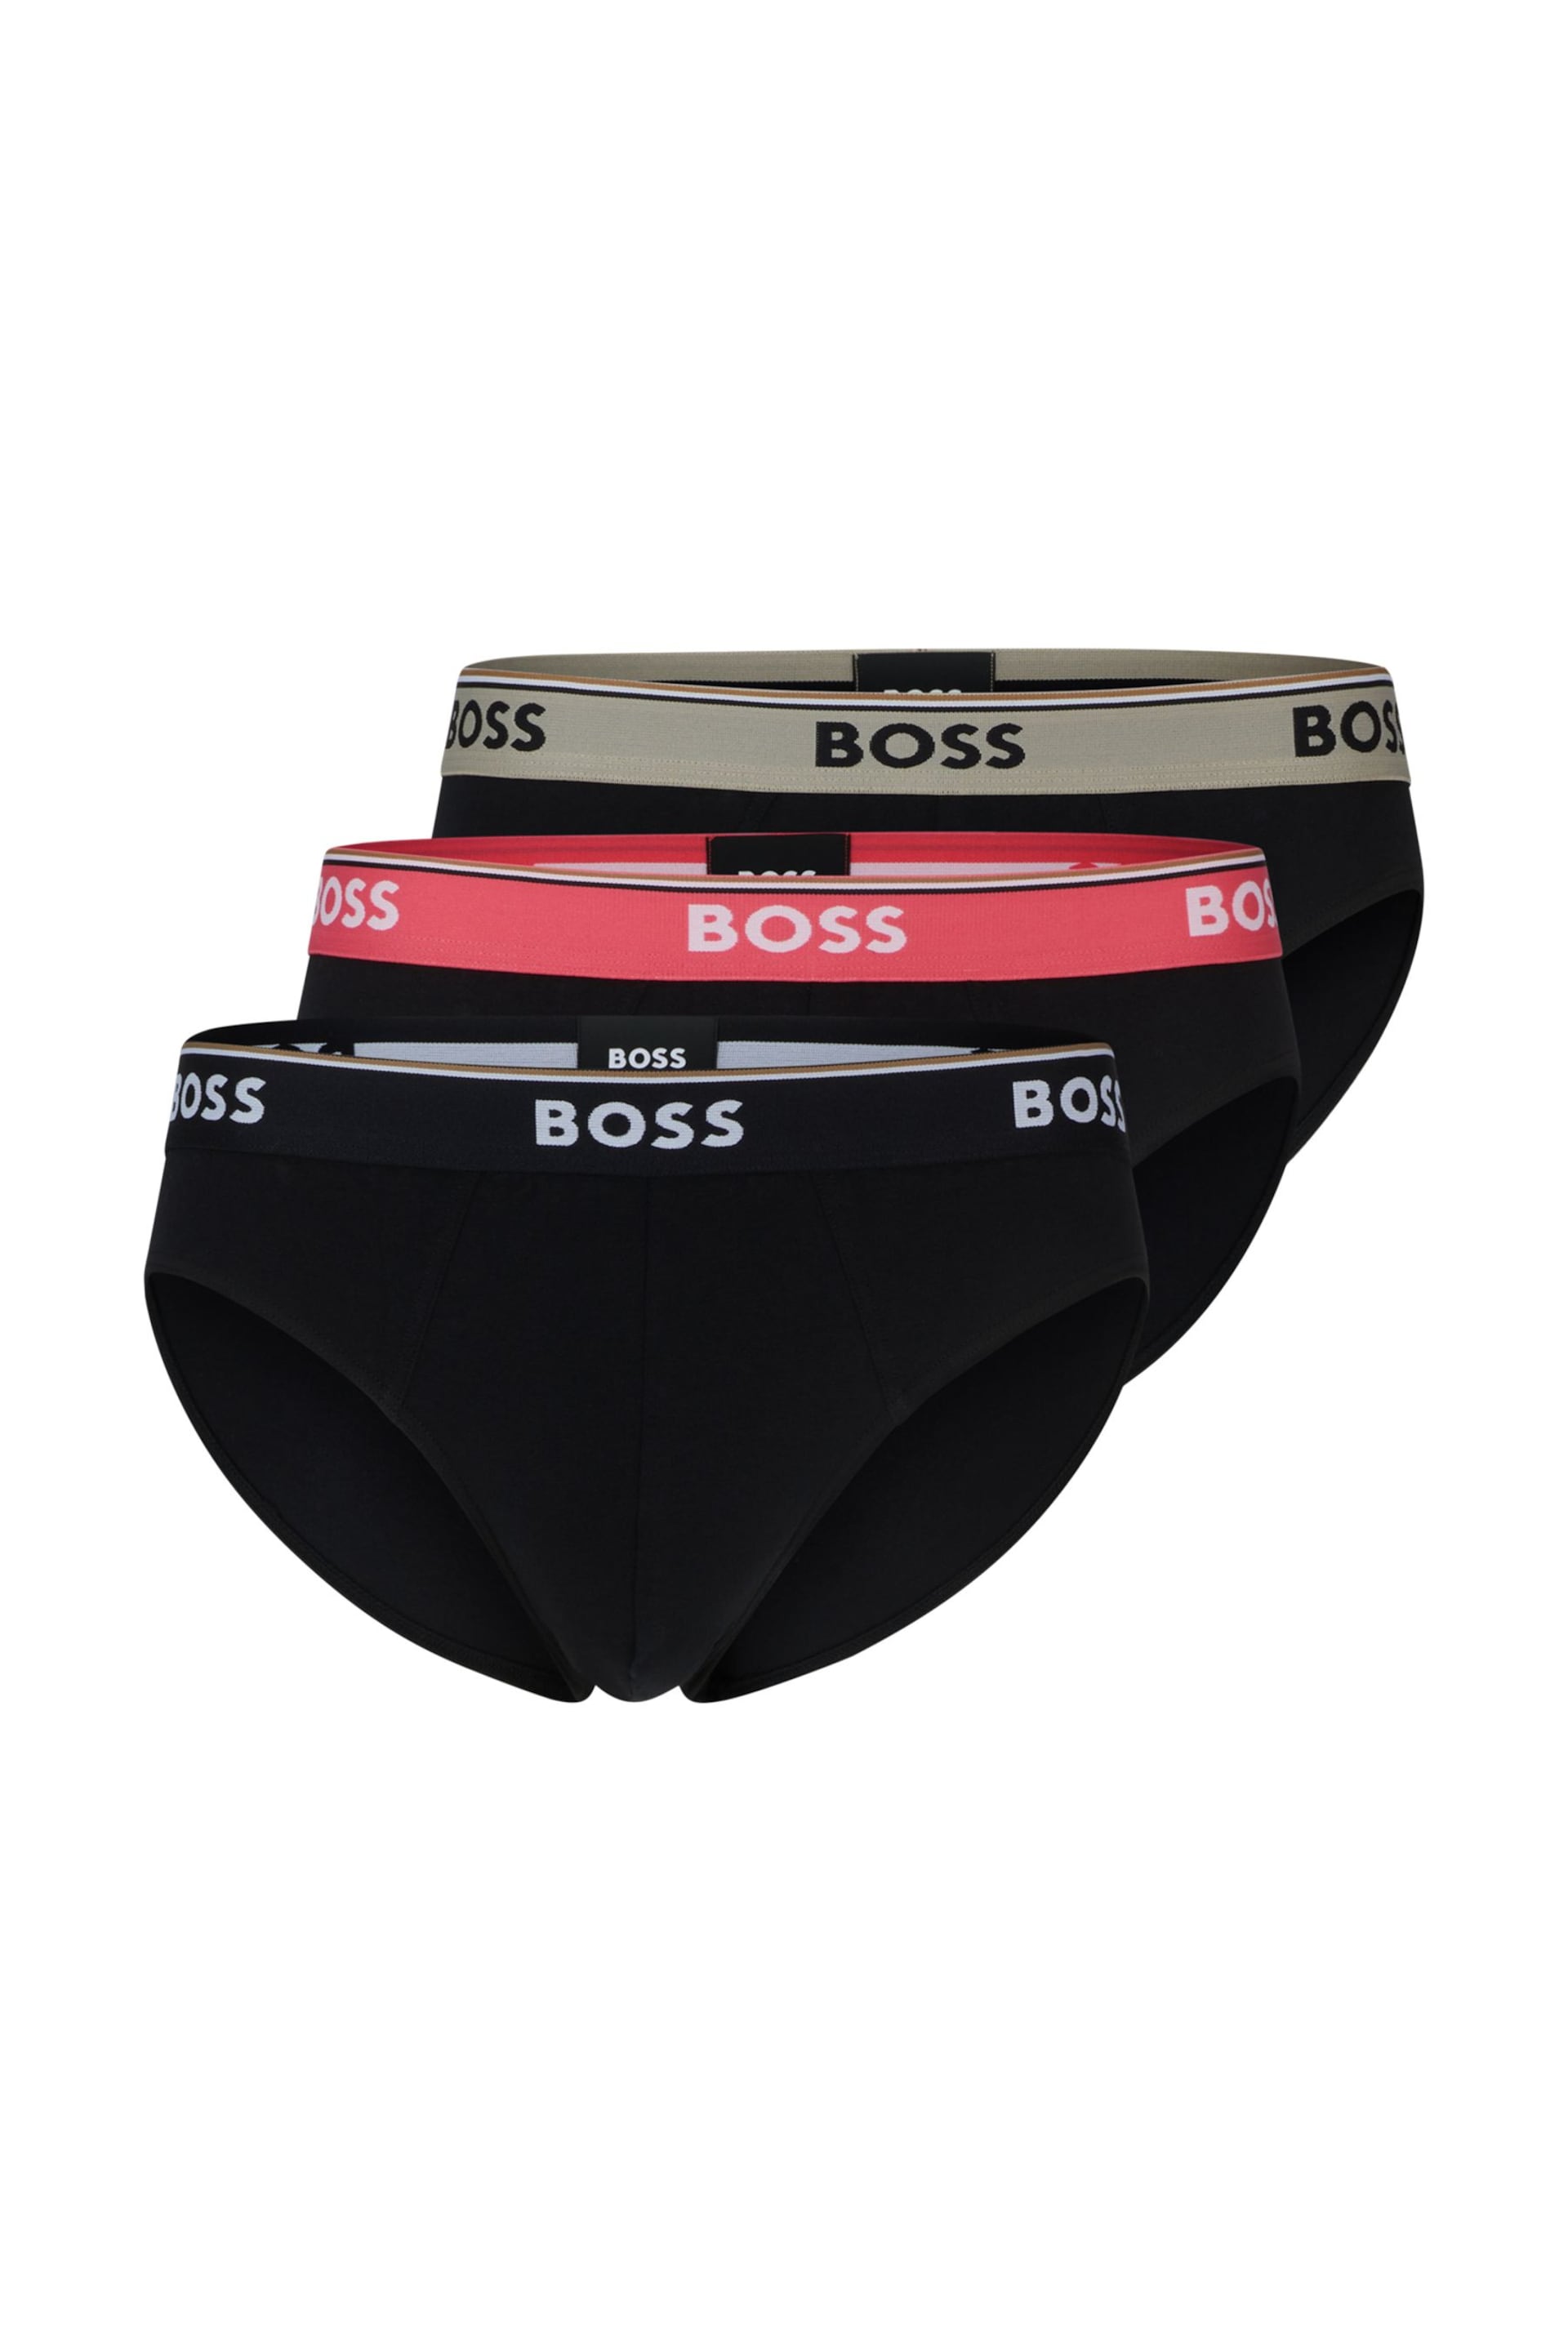 BOSS Black Stretch-Cotton Logo Waistband Boxer Briefs 3 Pack - Image 1 of 7